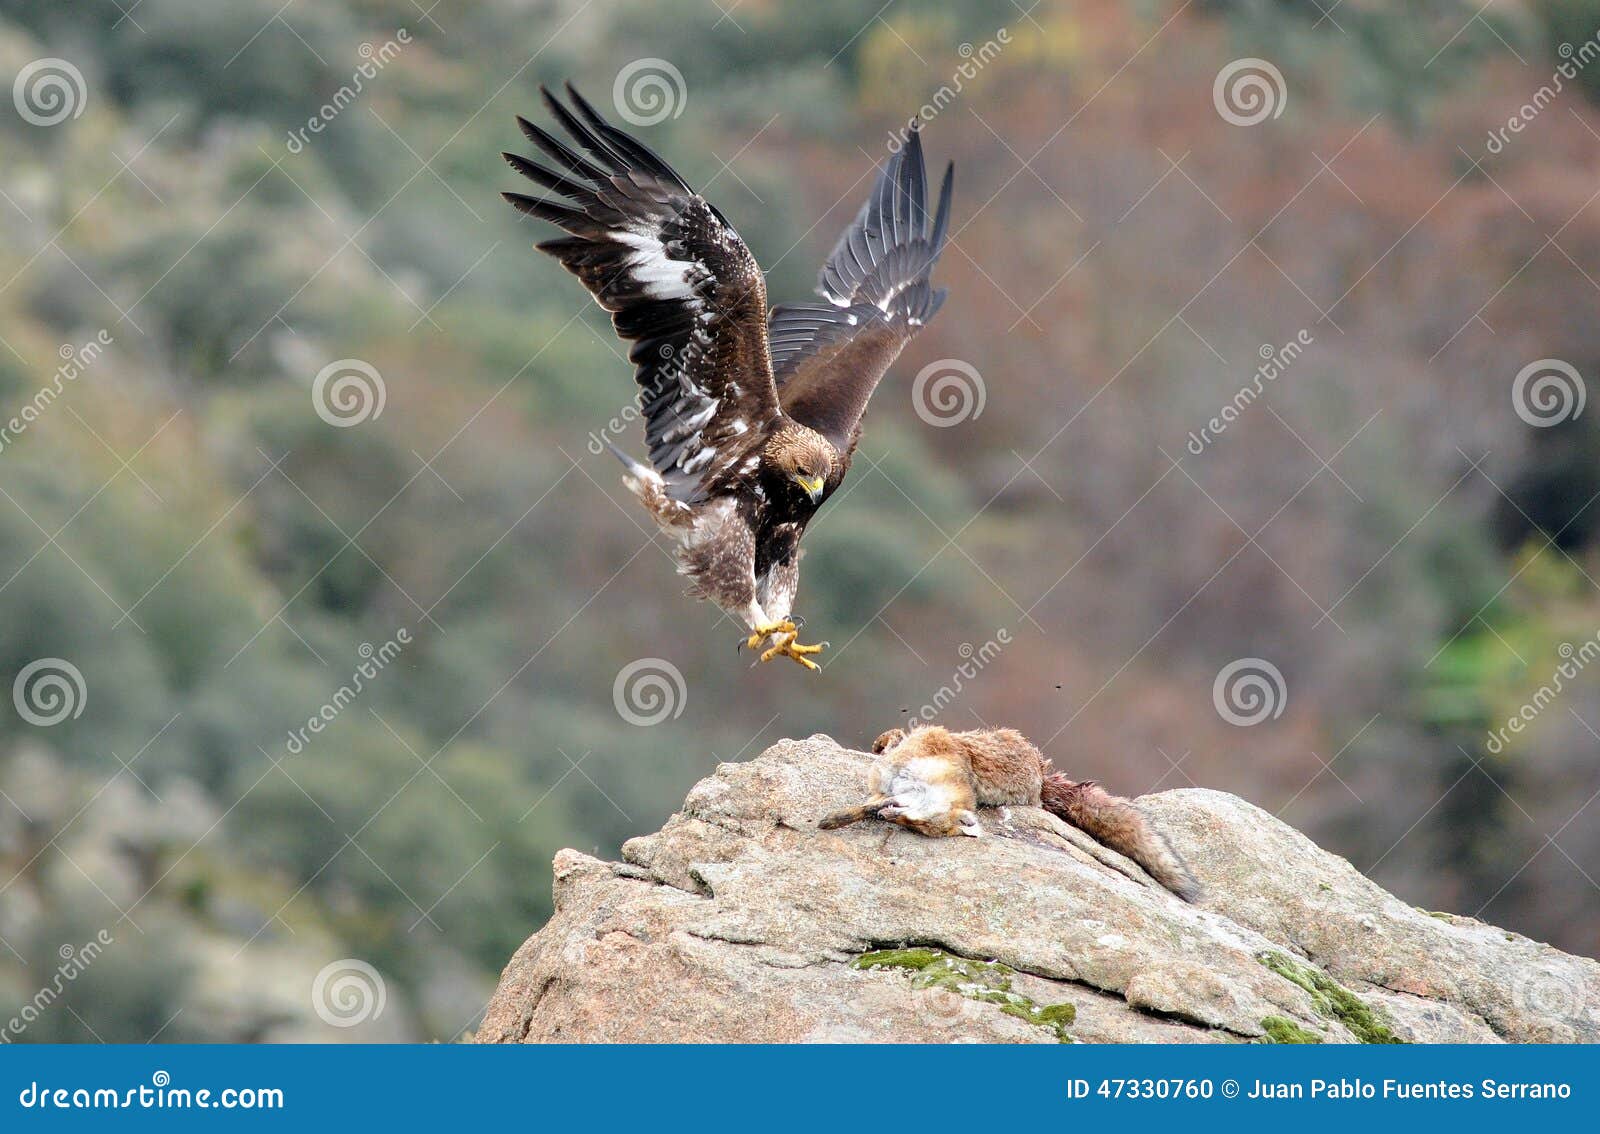 golden eagle holding the fox with claws